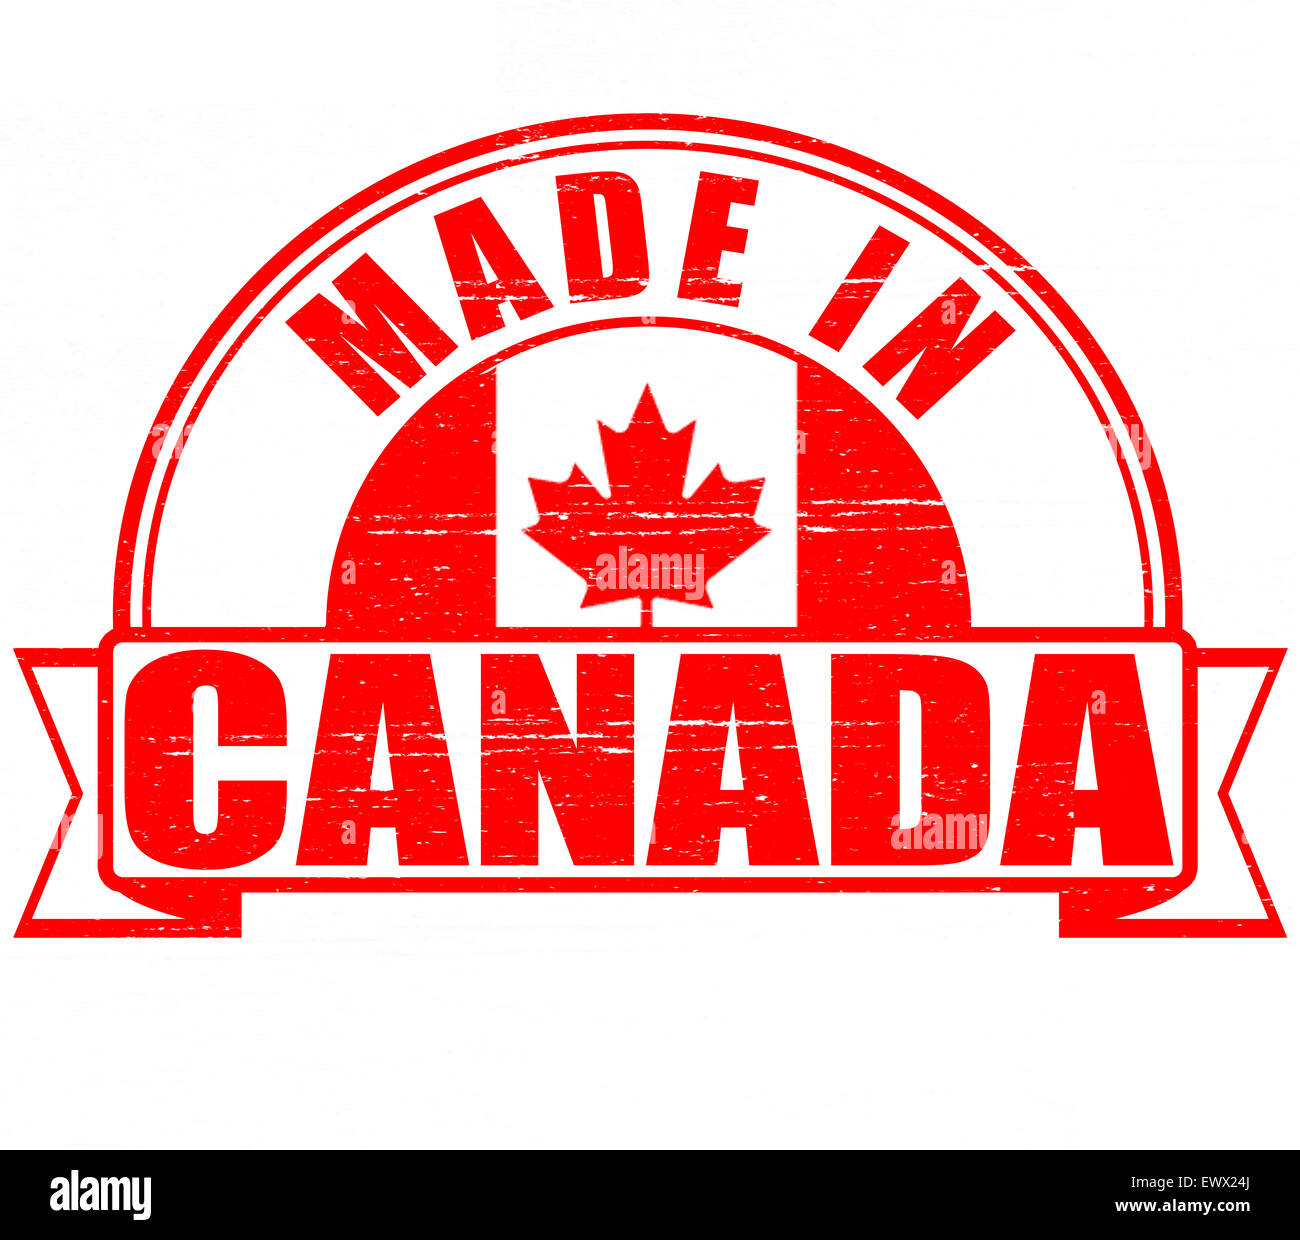 Stamp with text made in Canada inside, illustration Stock Photo